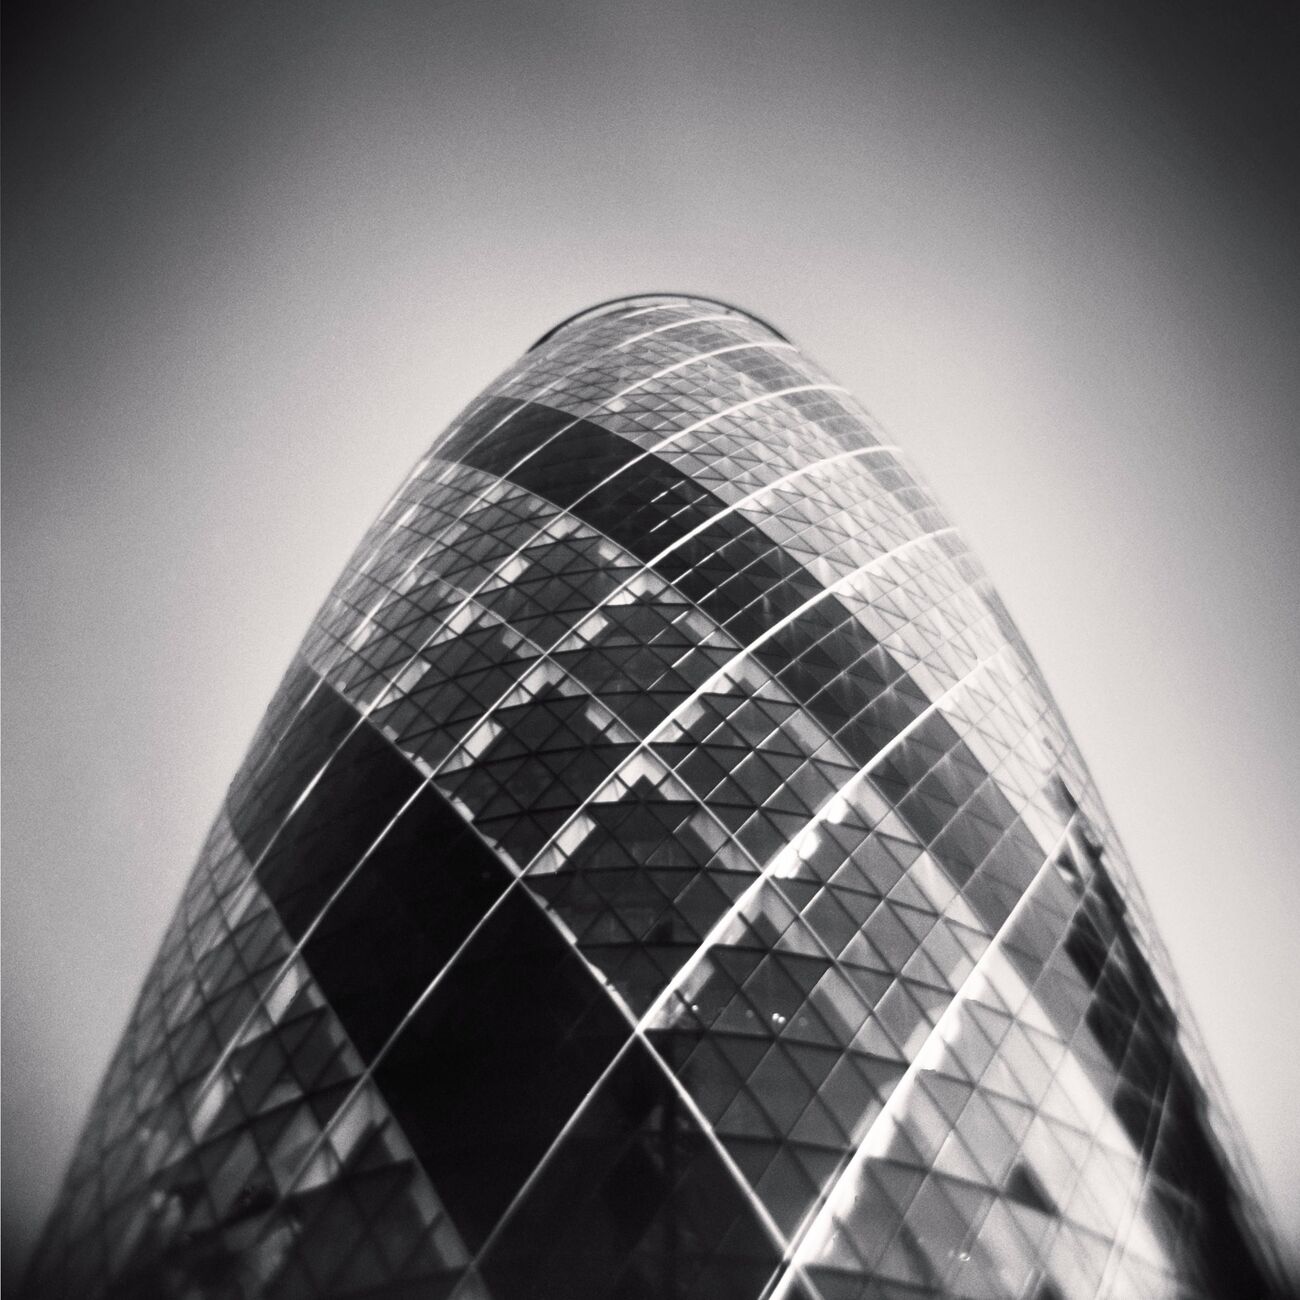 The Gherkin, Study 1, The City, London, England. April 2014. Ref-11459 - Denis Olivier Photography